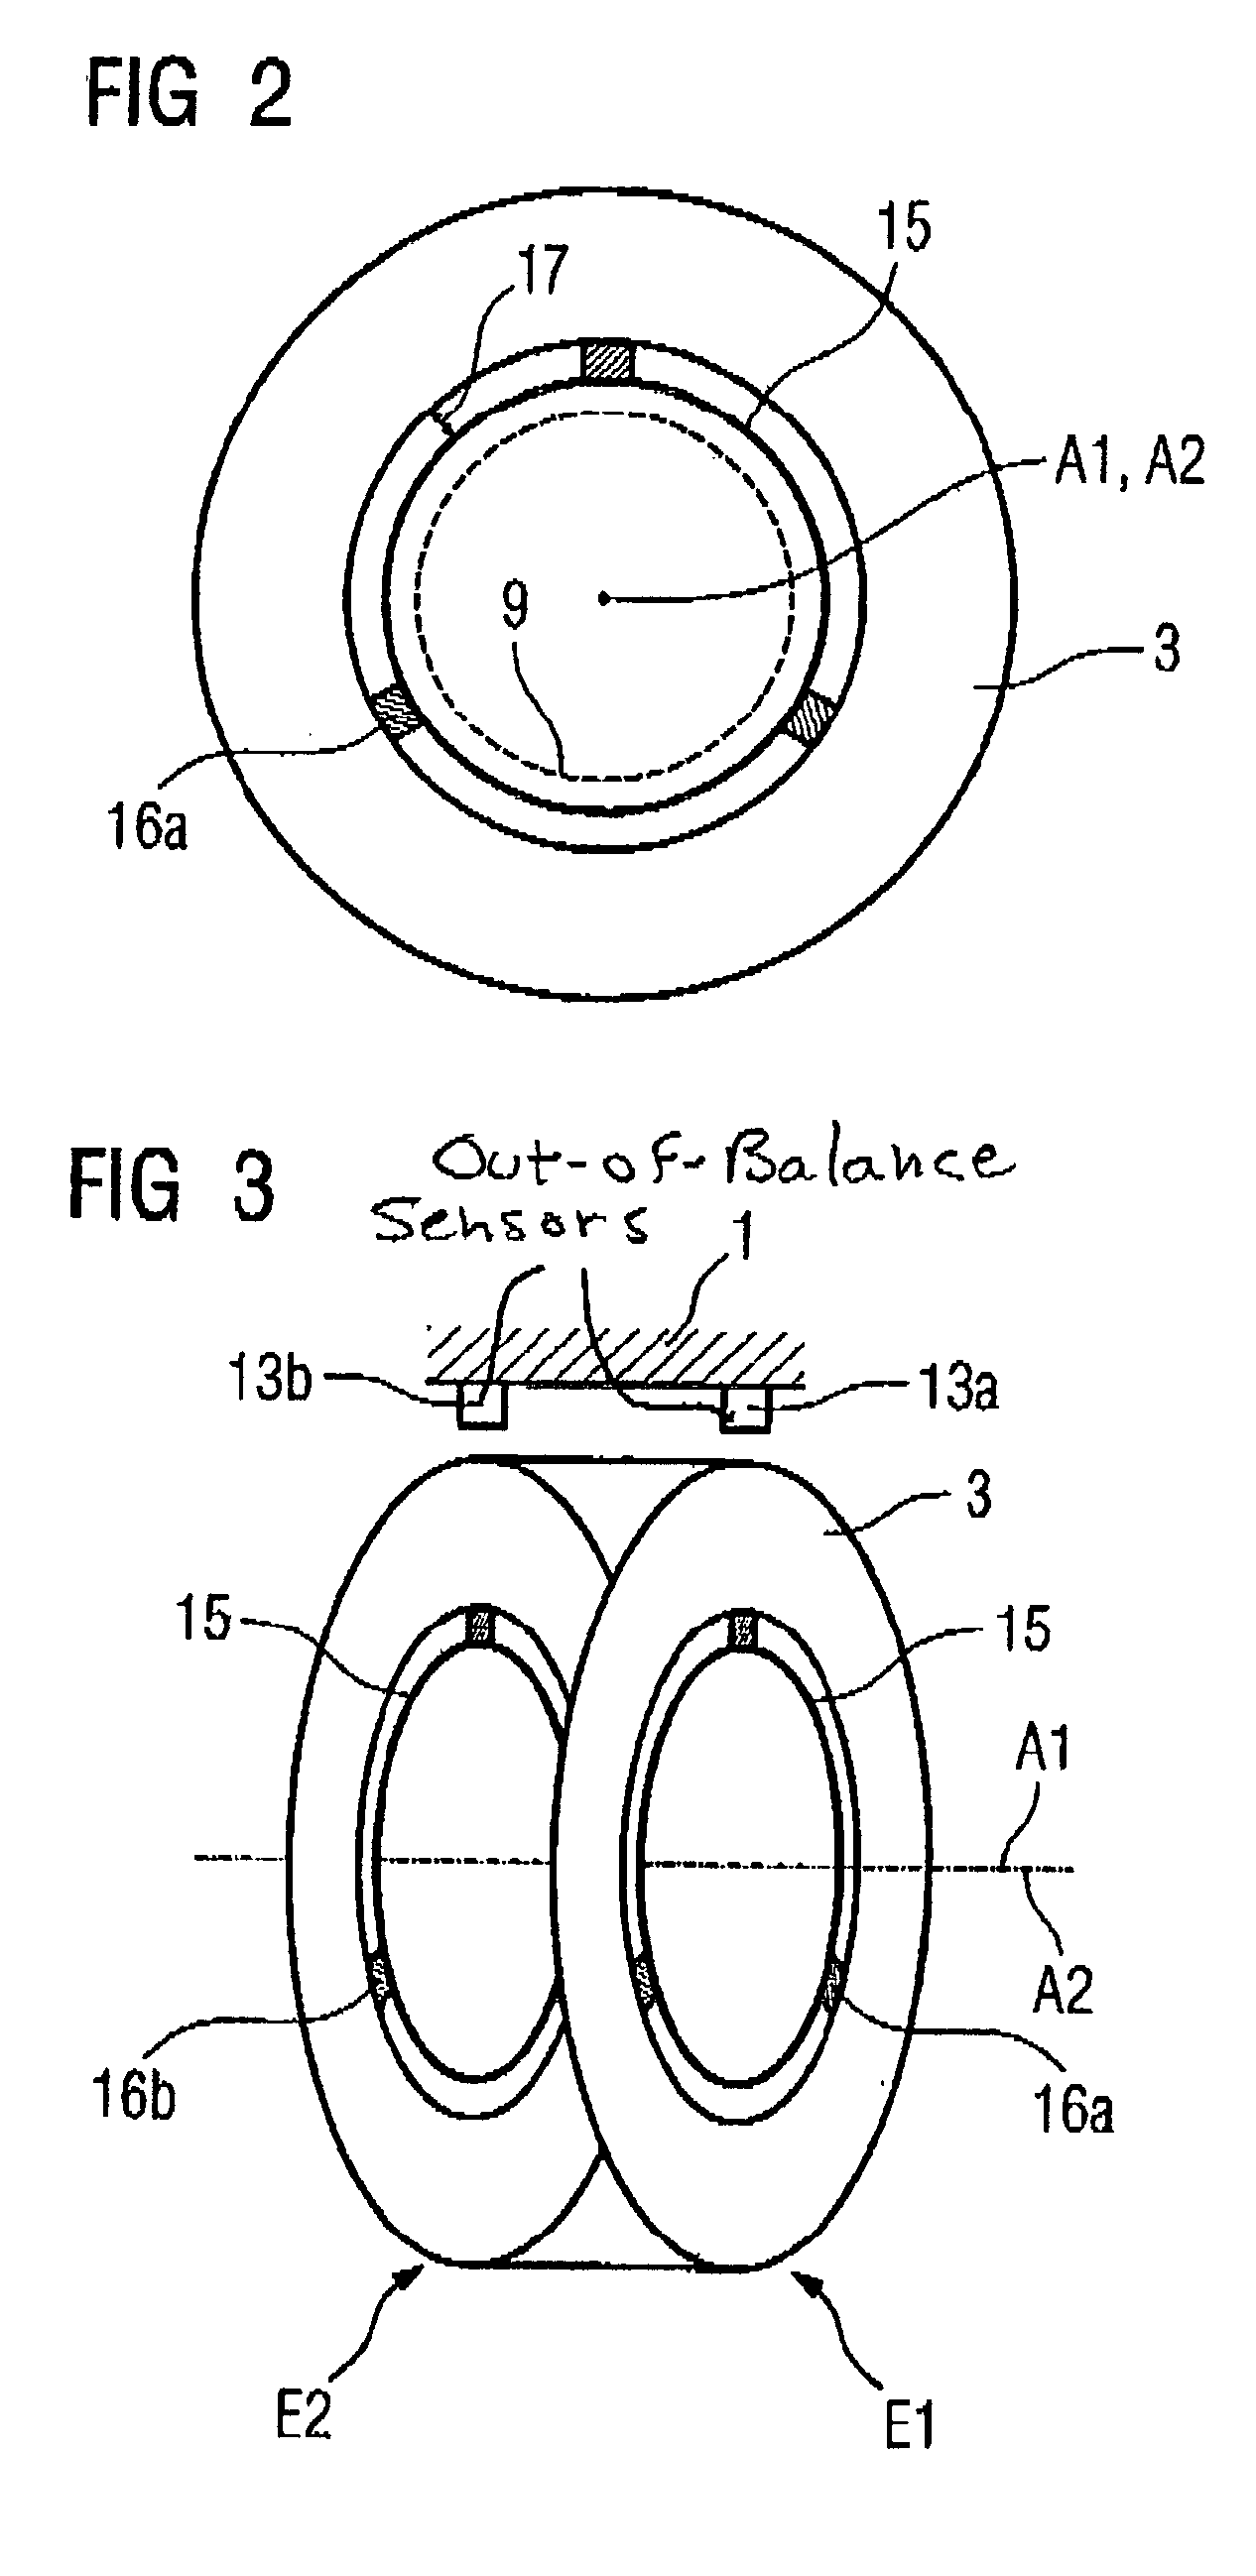 Method for compensating an out-of-balance condition of a rotating body